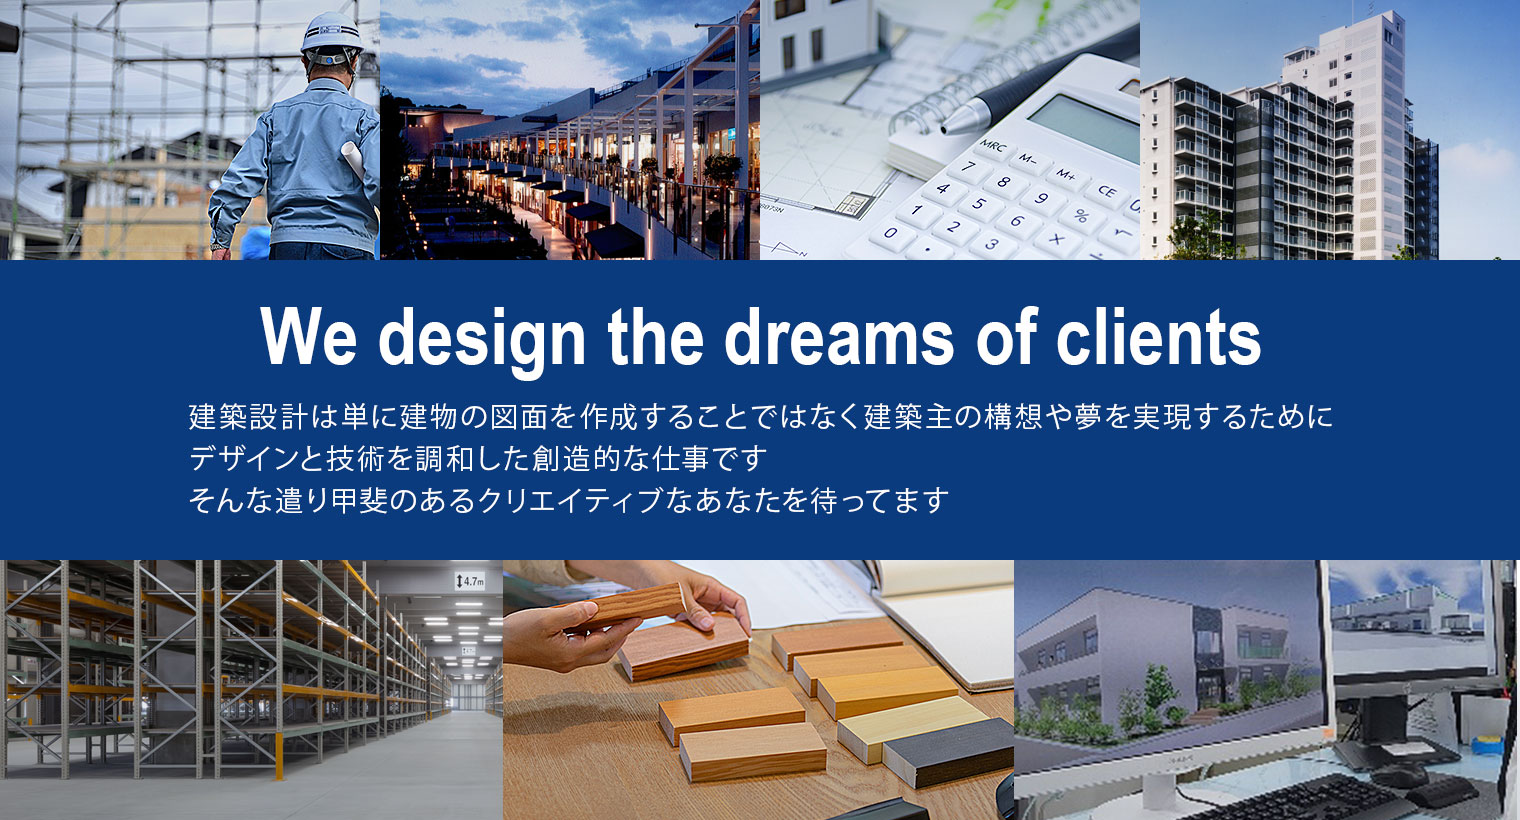 We design the dreams of clients